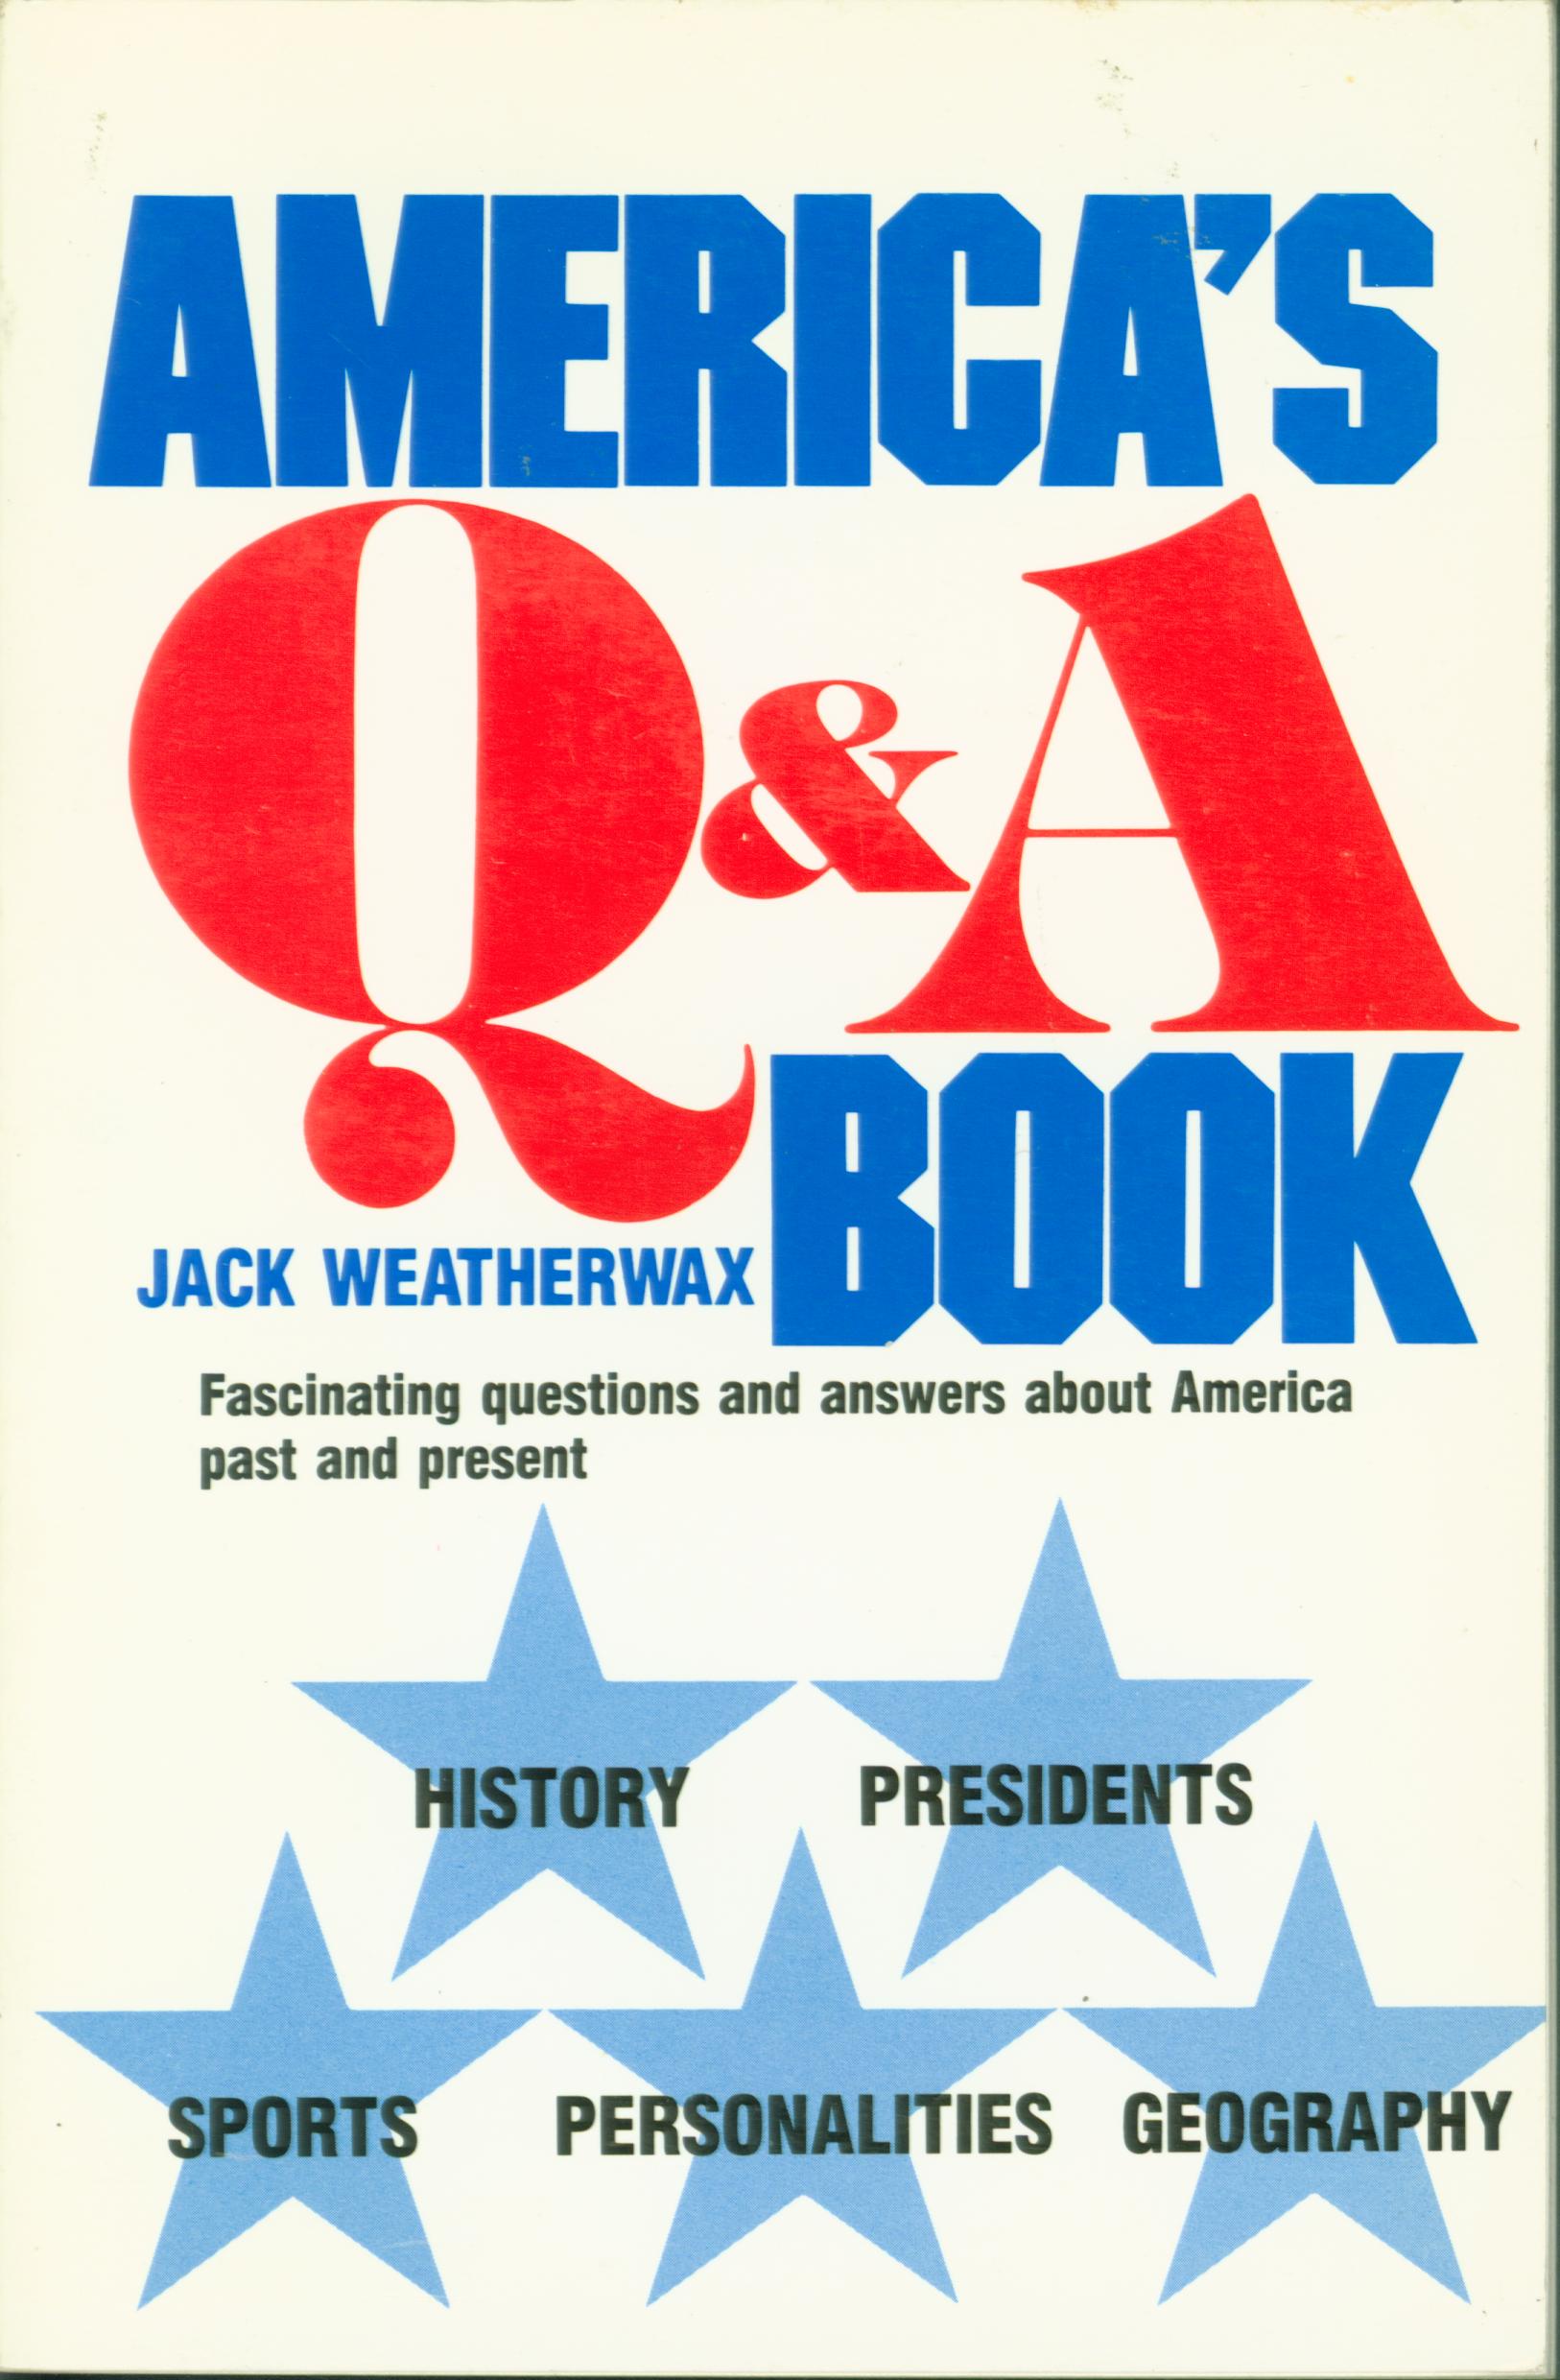 AMERICA'S Q & A BOOK: fascinating questions and answers about America's past and present